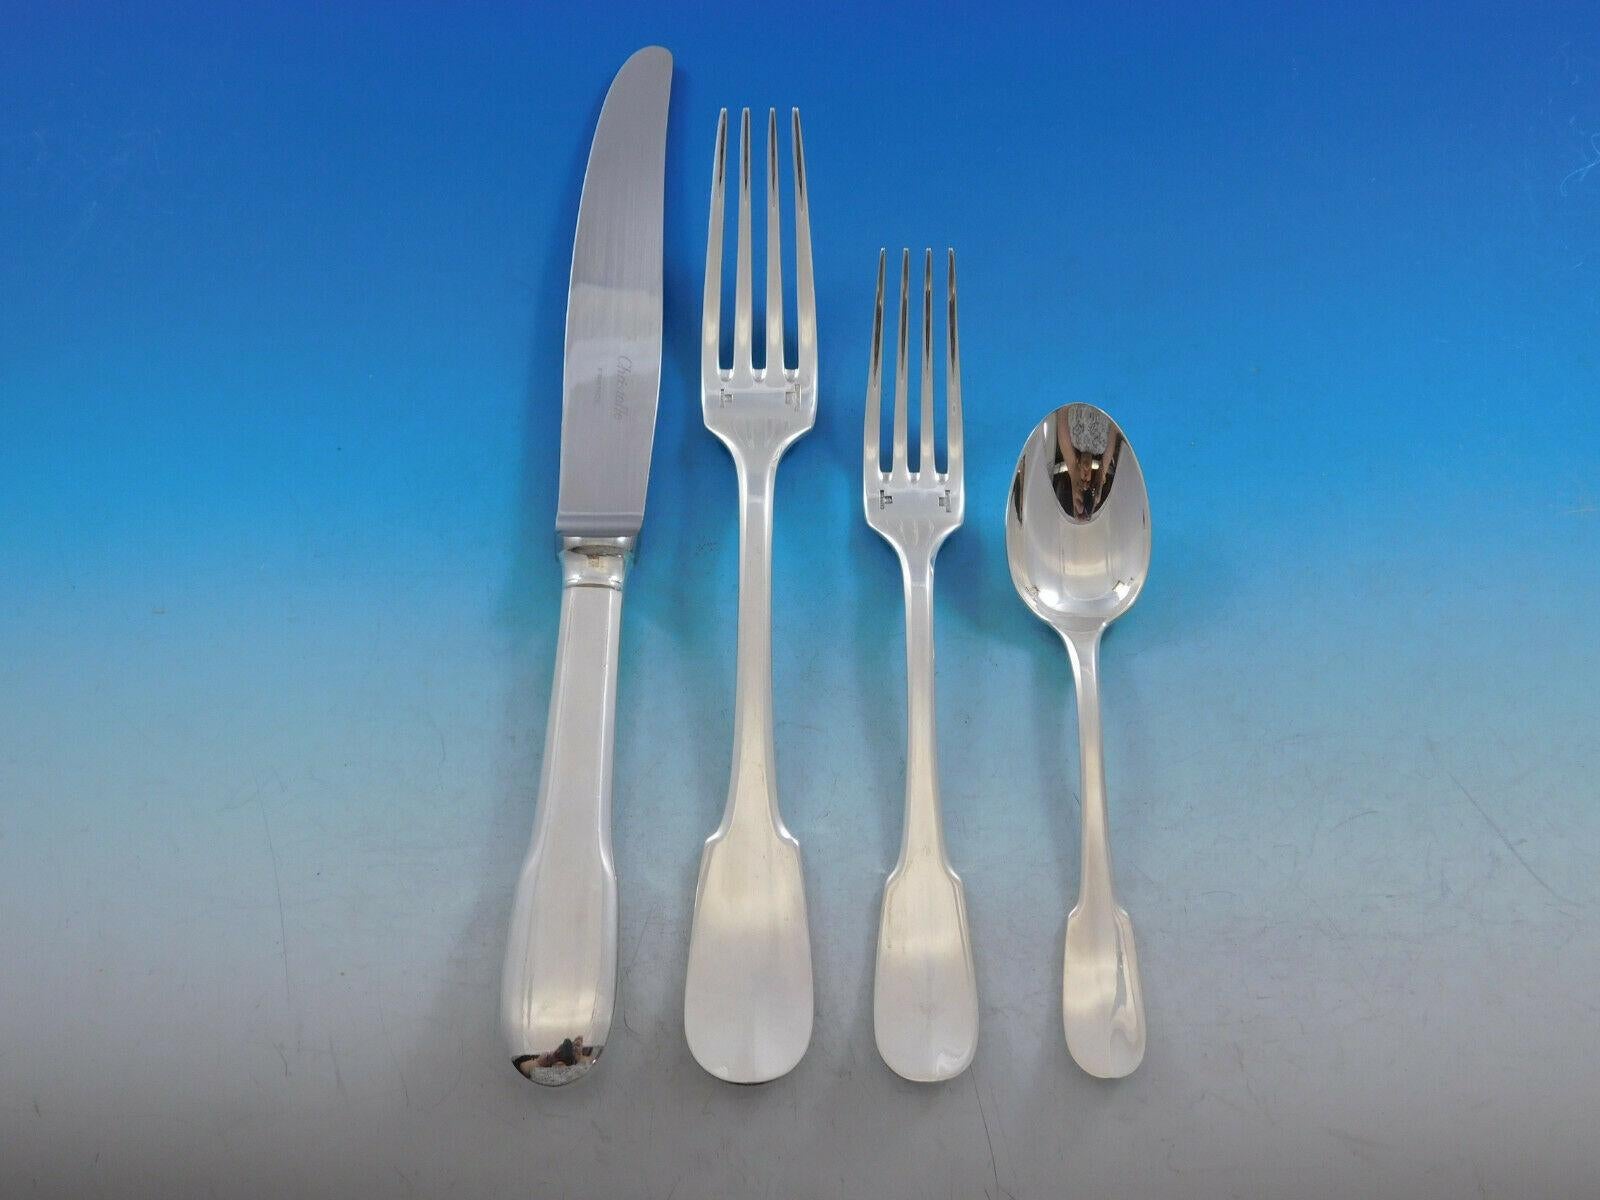 Dinner size Cluny by Christofle France estate silver plate flatware set - 61 pieces. This set includes:

12 dinner size knives, 9 1/2